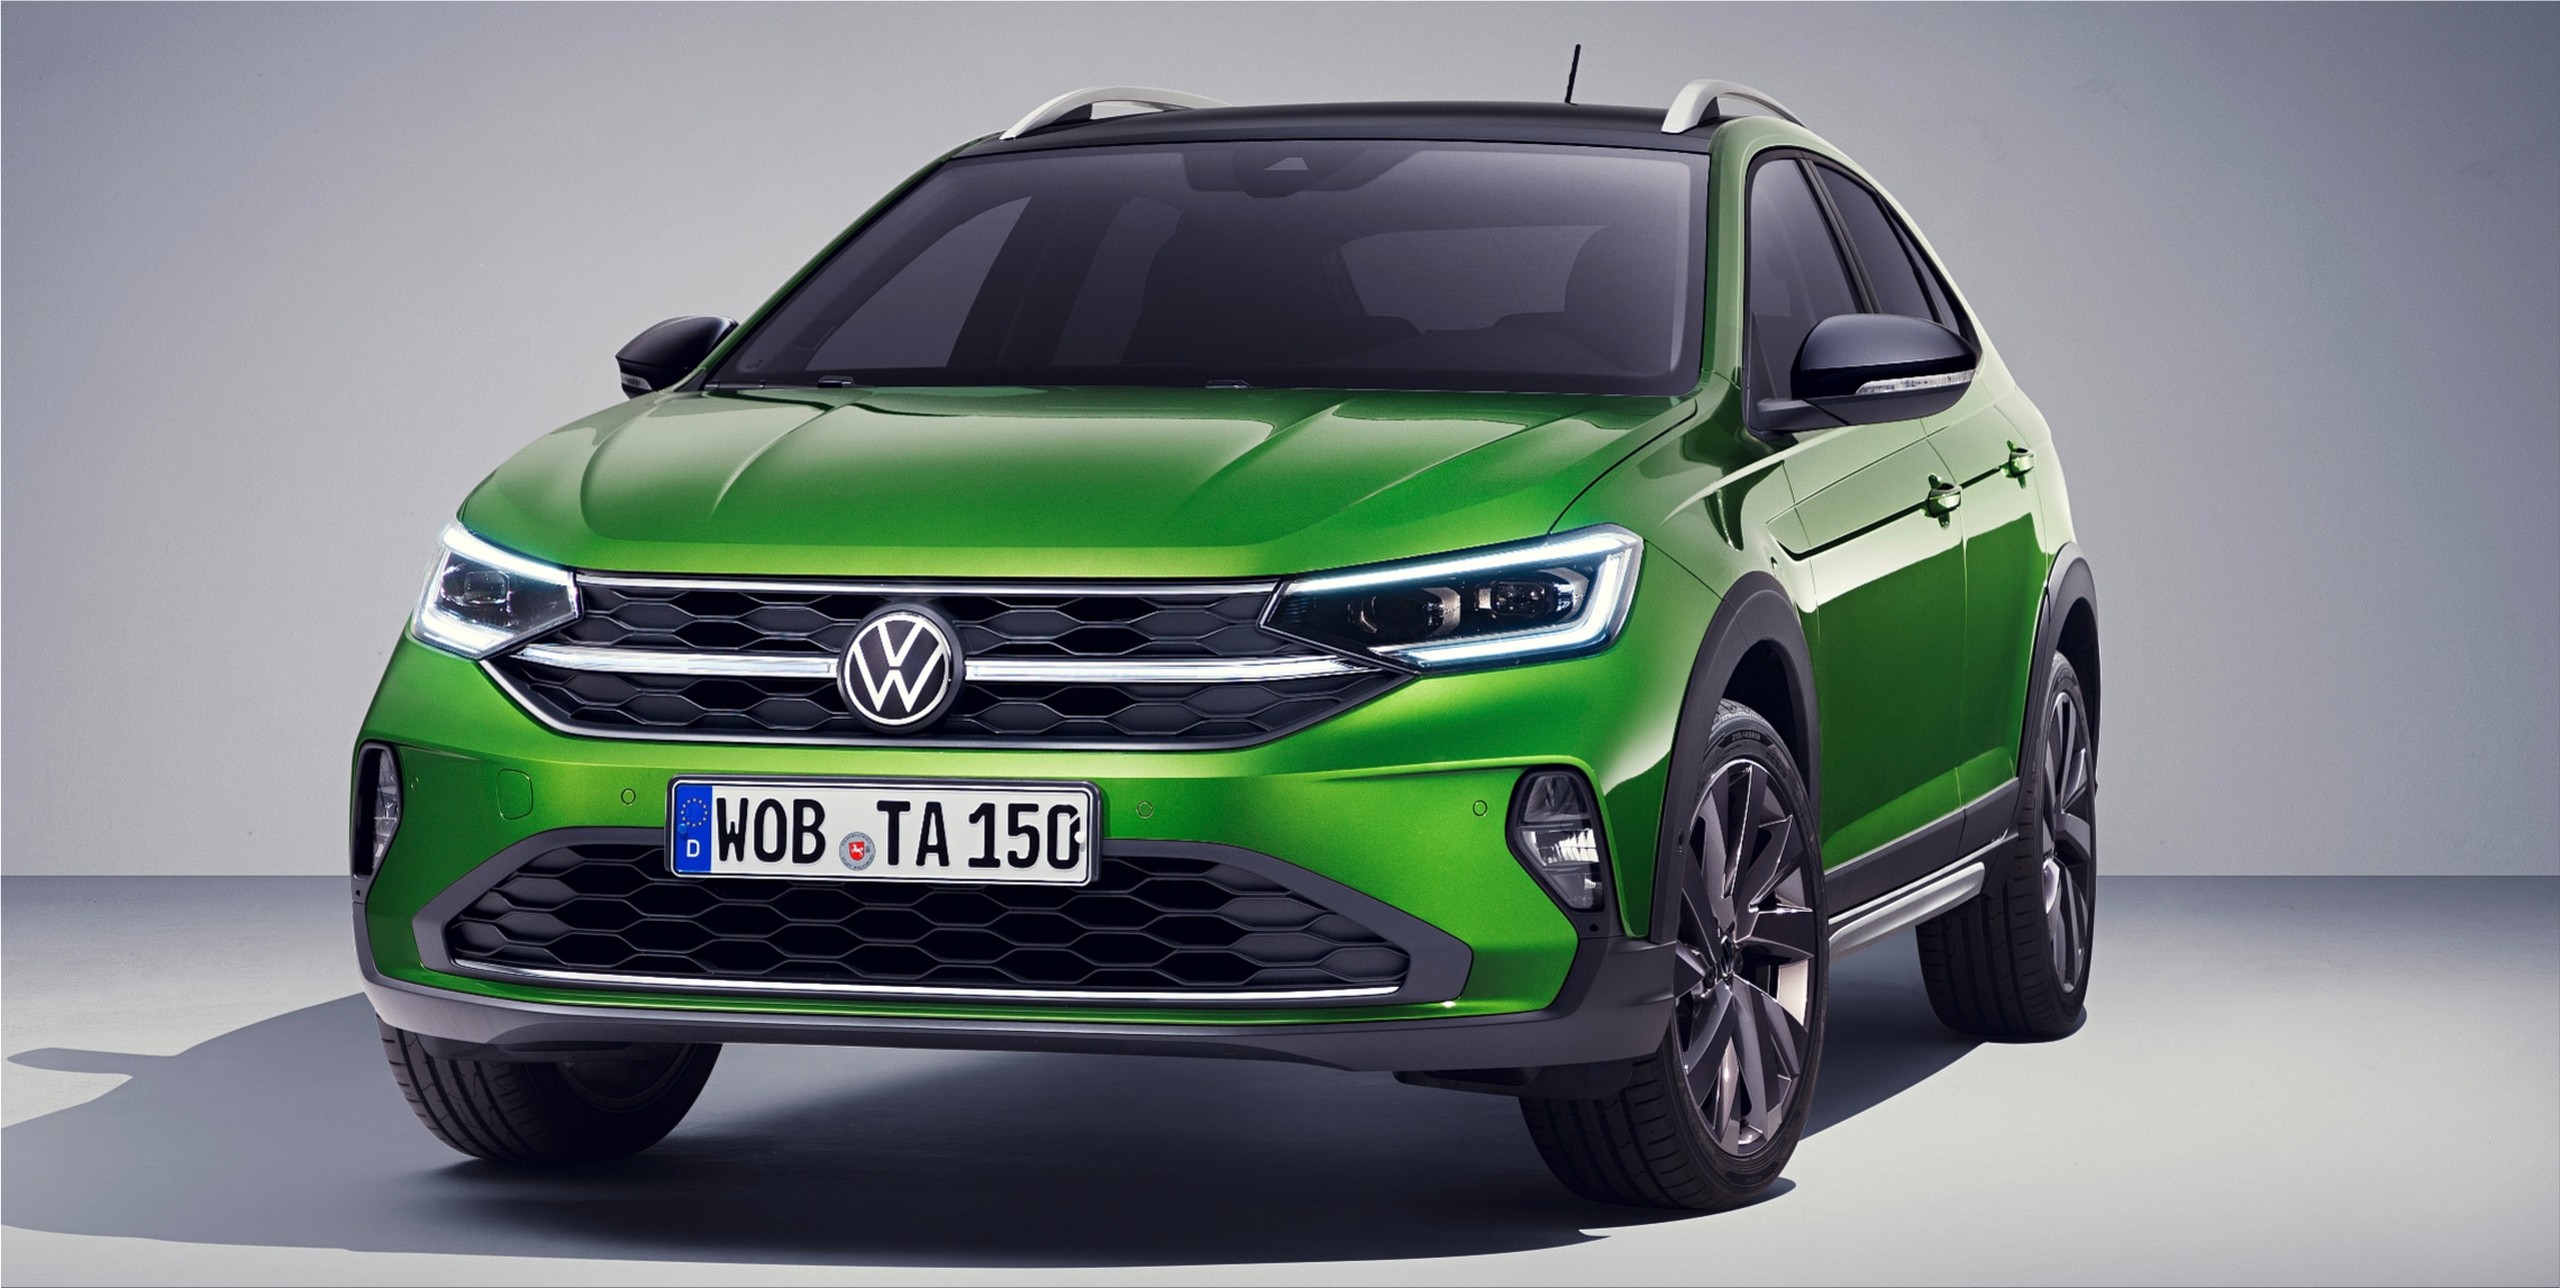 The new Volkswagen Taigo is a Polo-based SUV coupe